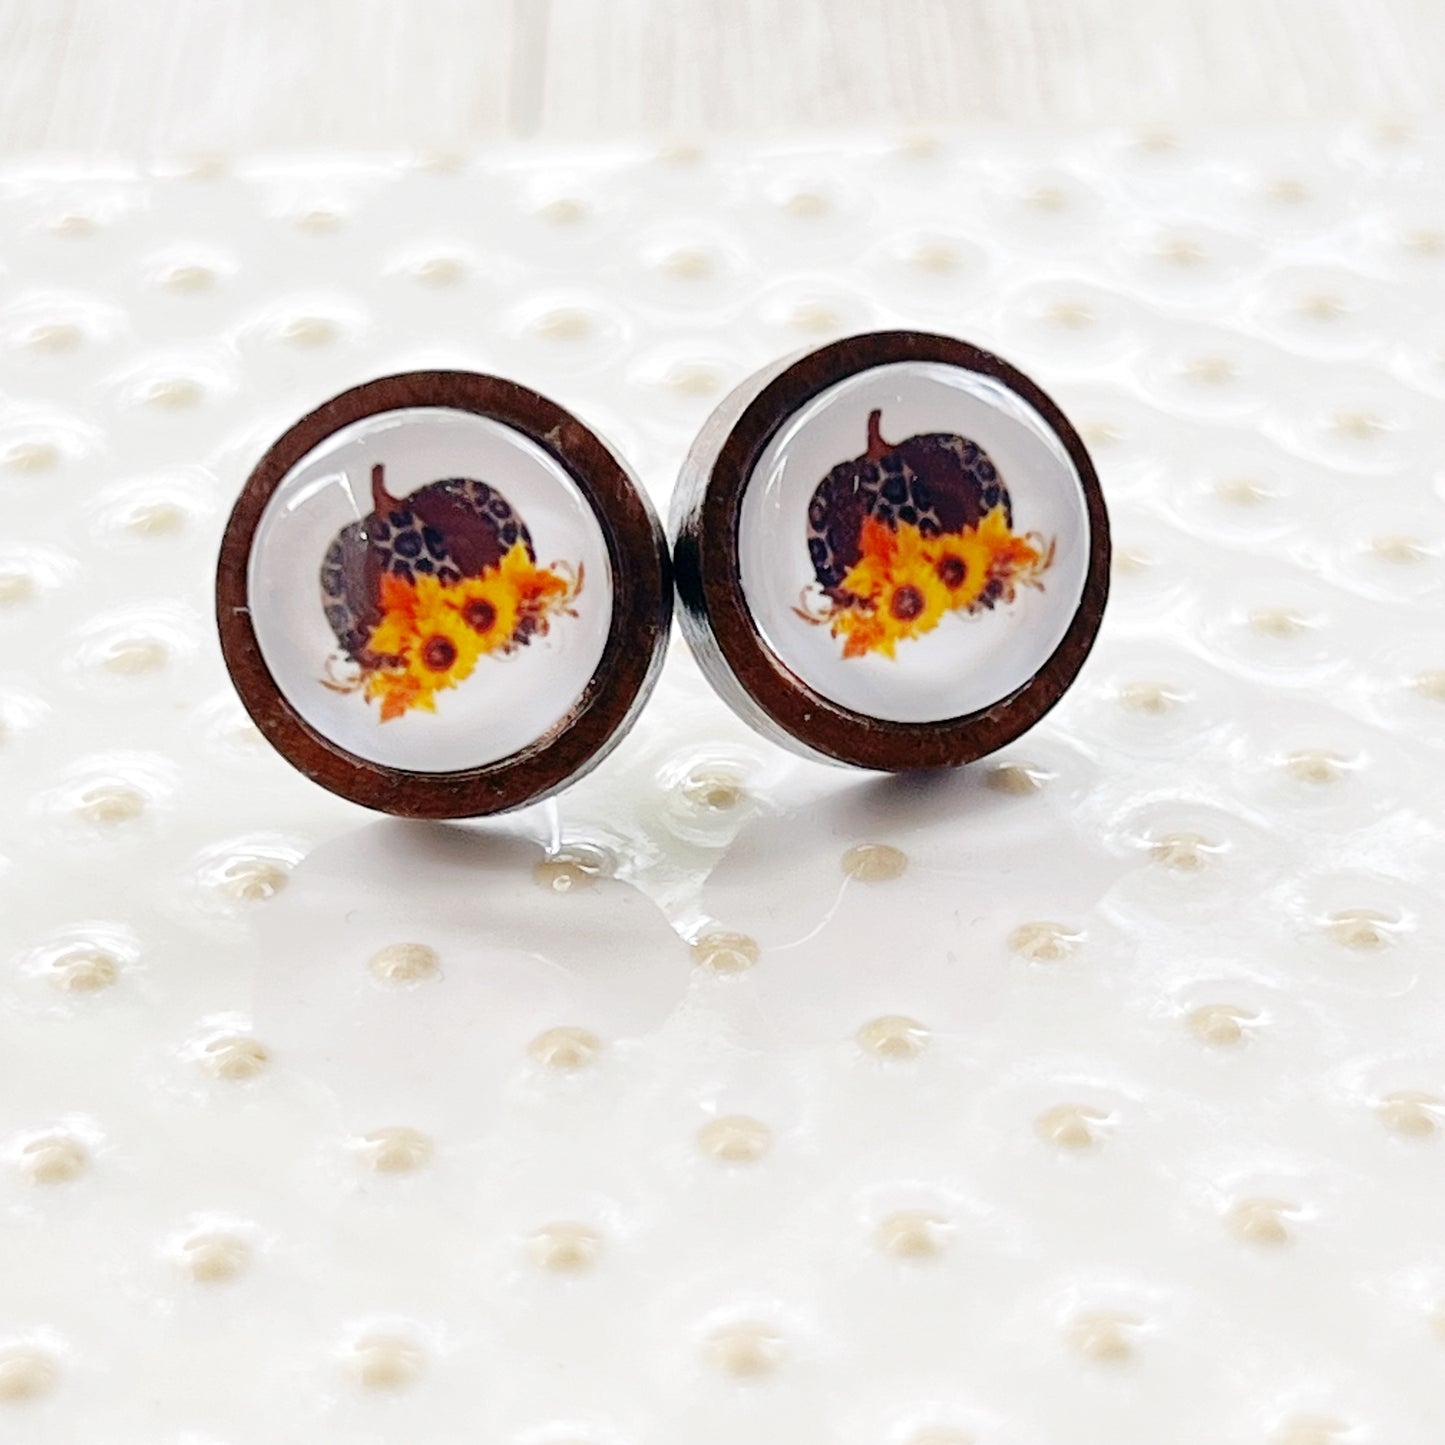 Sunflower & Pumpkin Wood Stud Earrings: Charming Autumnal Accents for Your Style